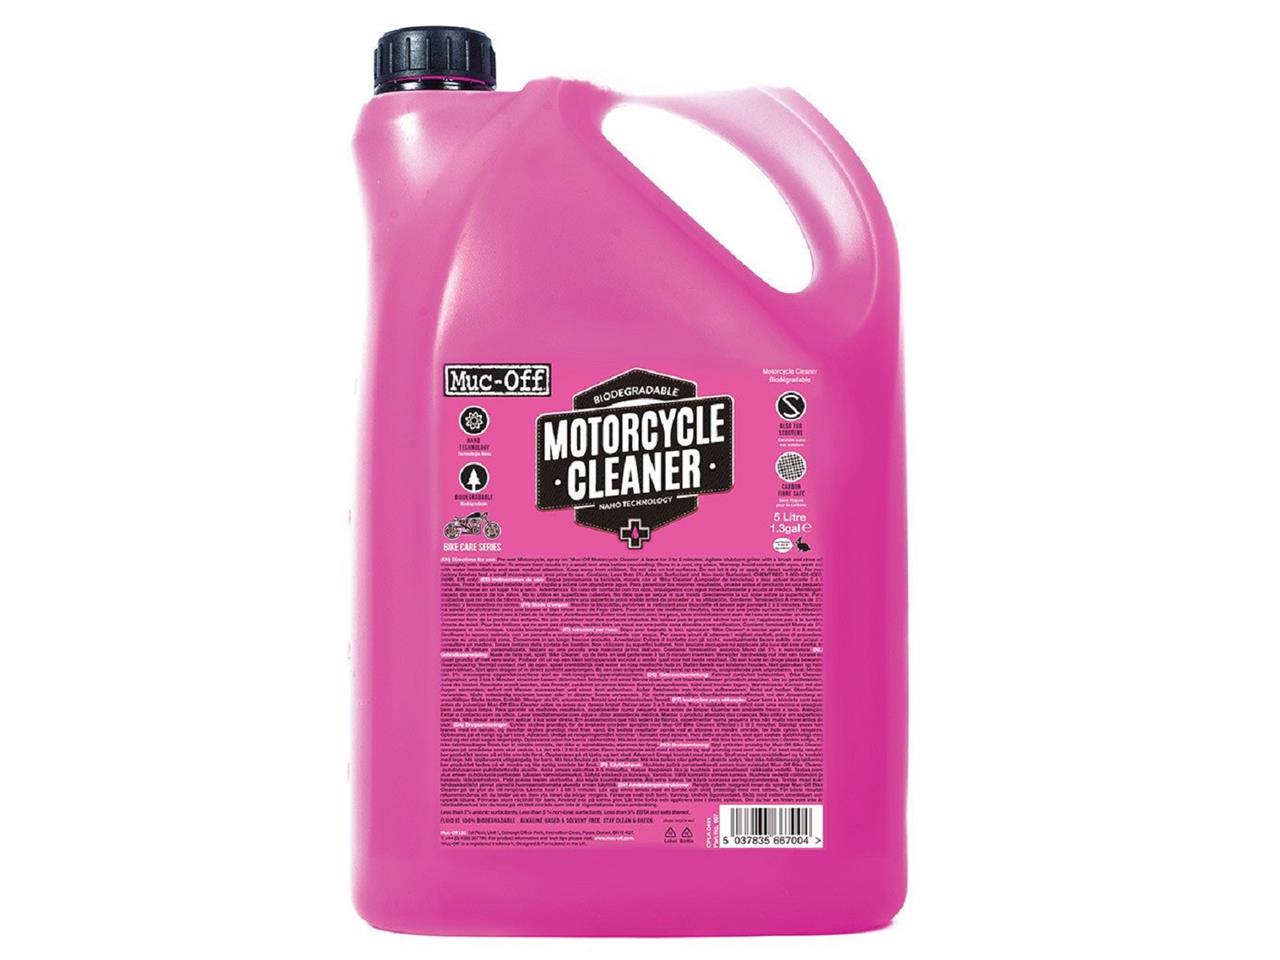 Nettoyant marque Muc-off Motorcycle Cleaner bidon 5L